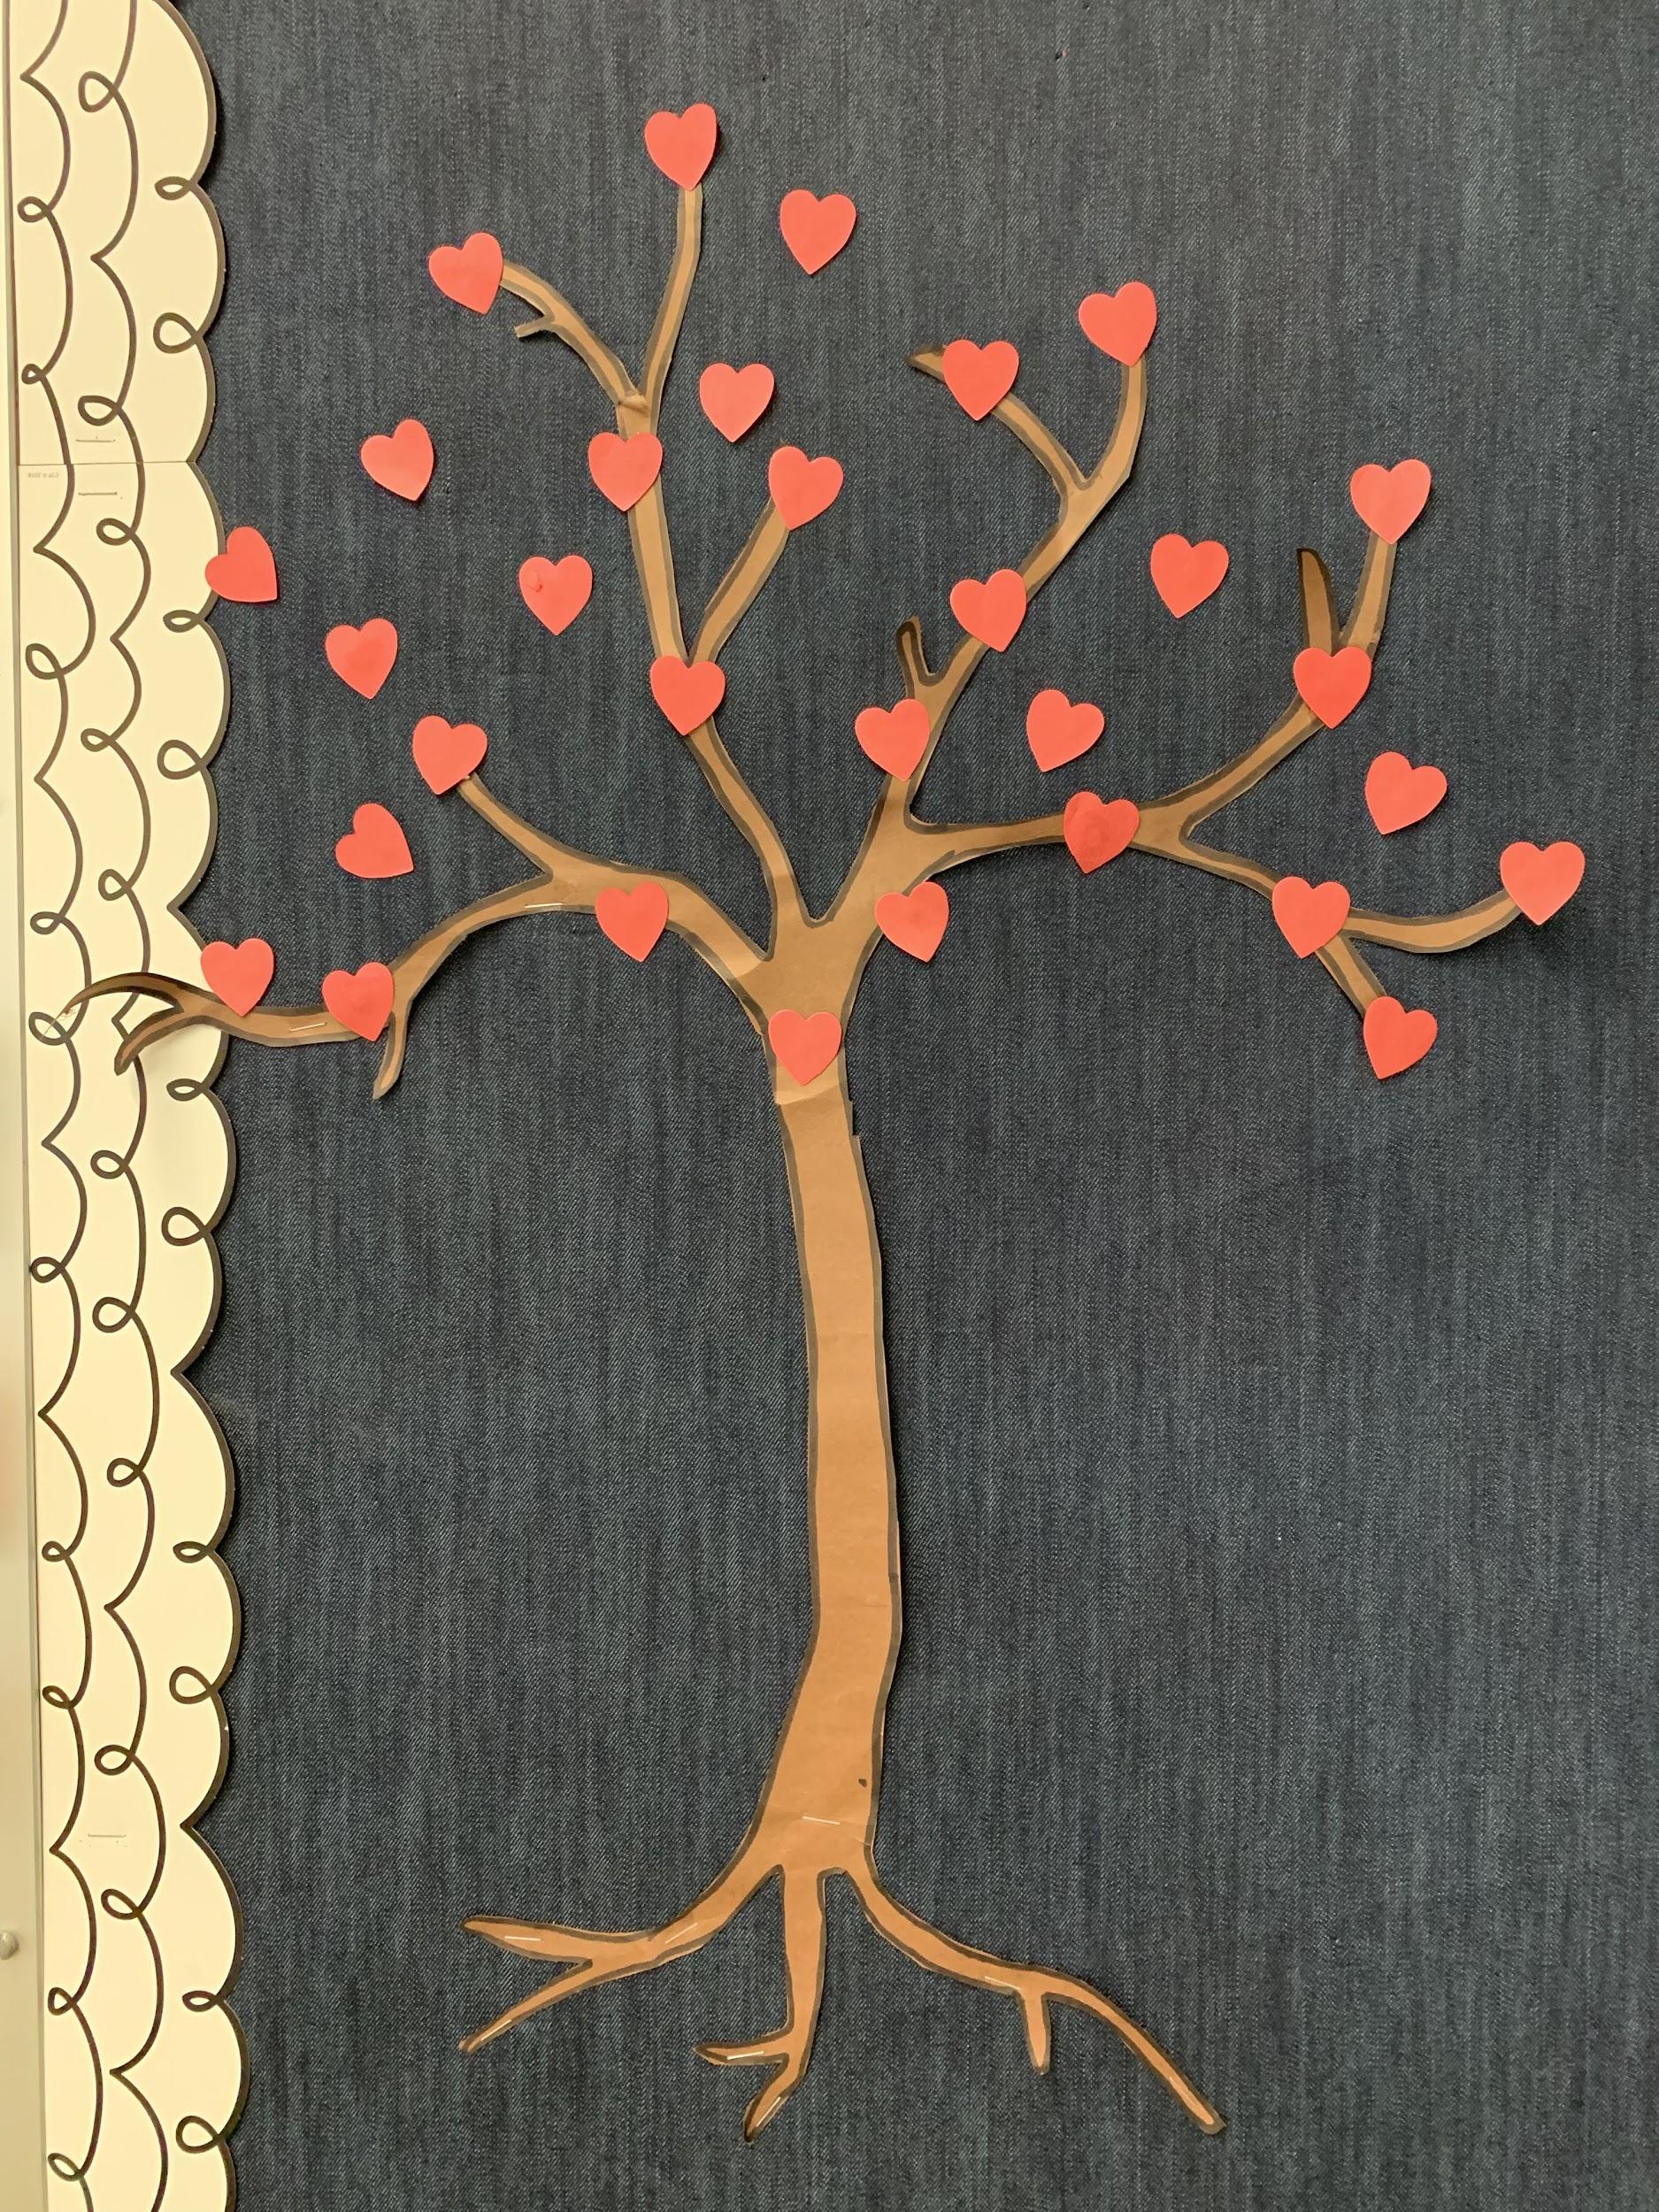 Kindness Tree with heart-shaped leaves